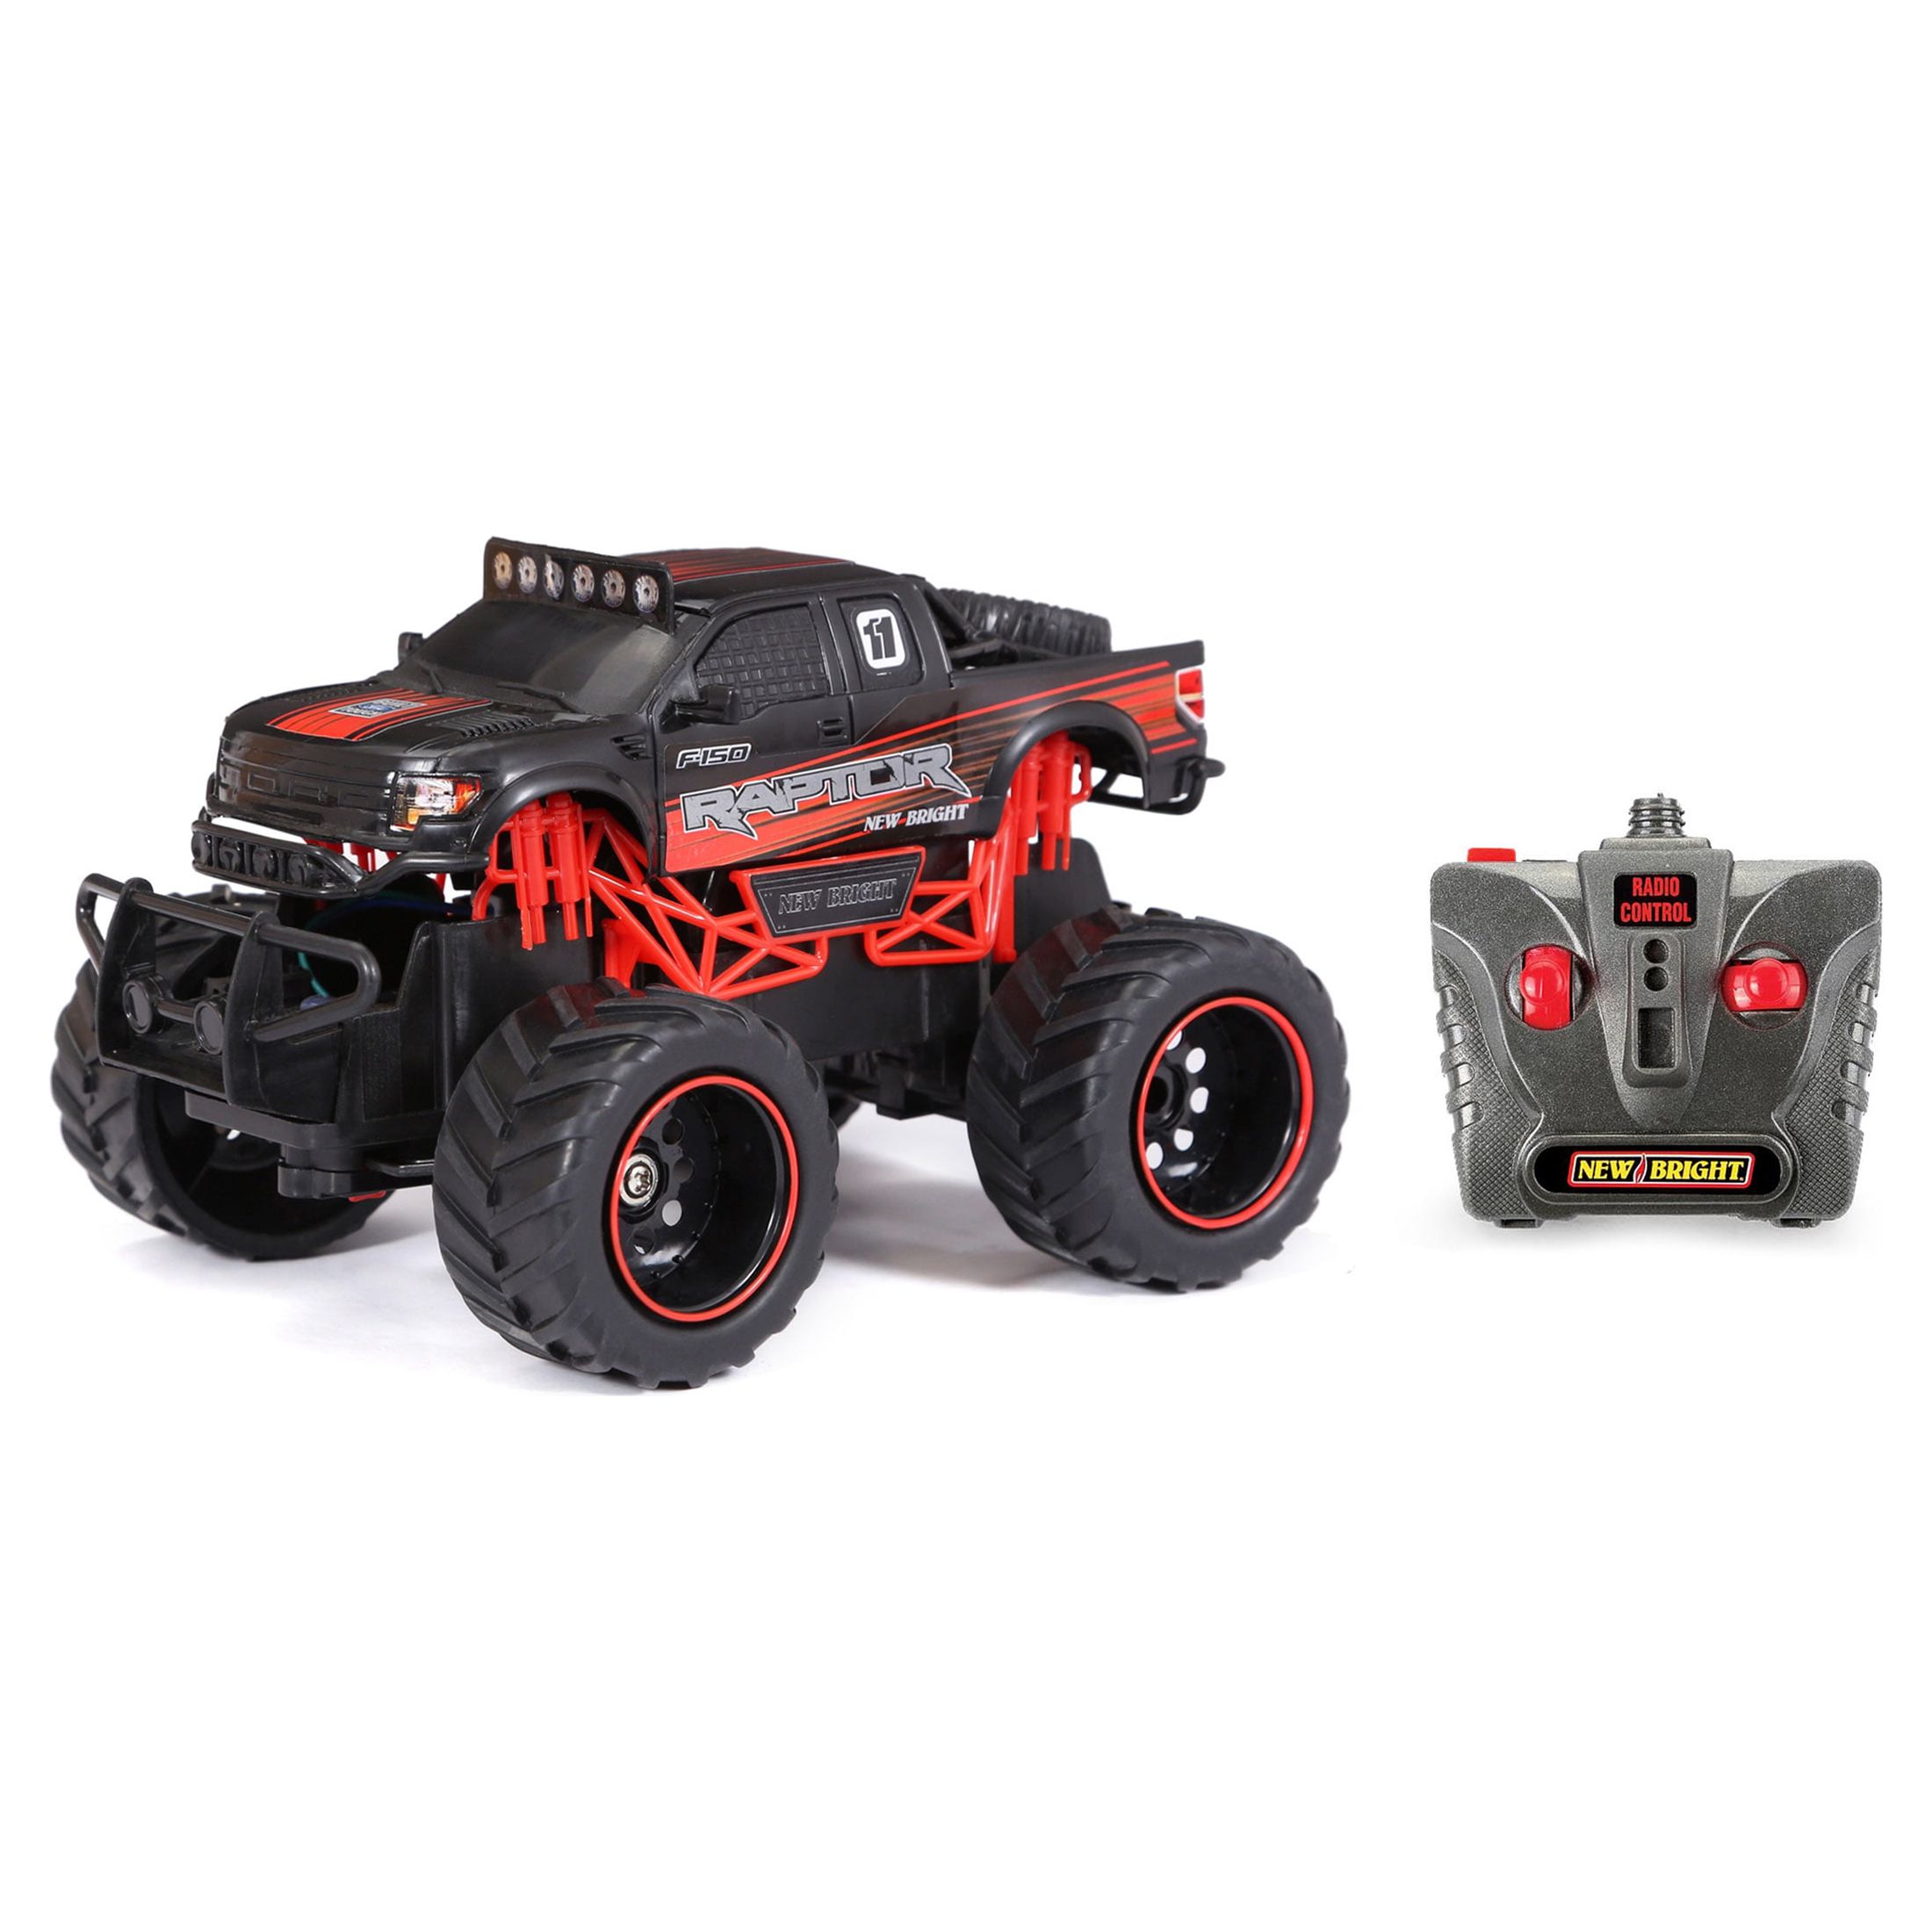 New Bright (1:24) Ford Raptor Battery Remote Control Black Truck, 2424-4K2 - image 1 of 9